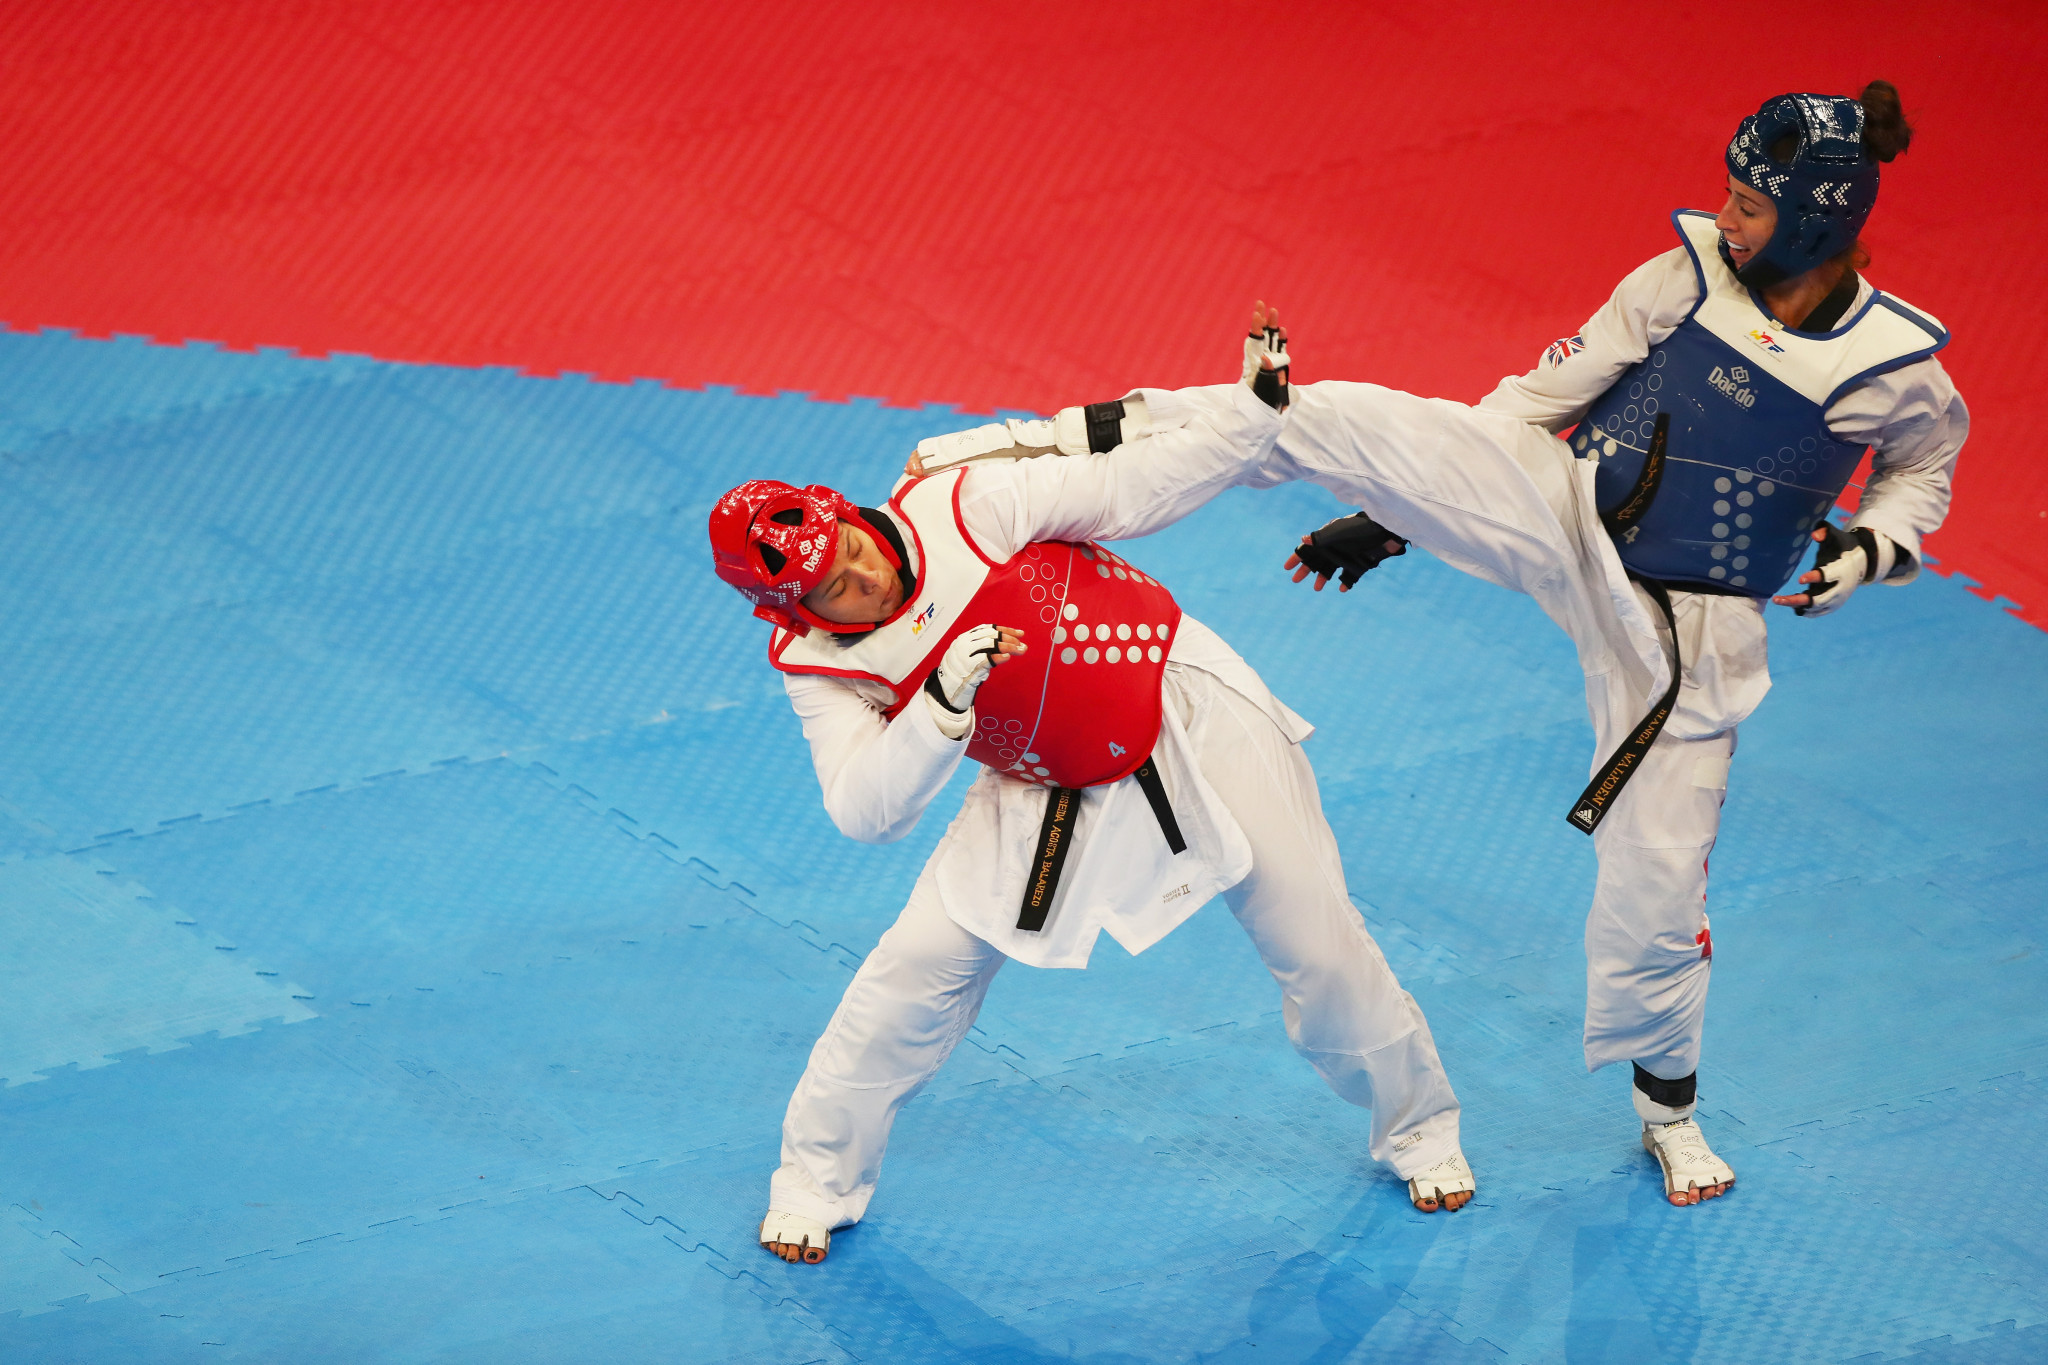 World Taekwondo claim the success of athletes such as Bianca Walkden mean the sport is popular in England and it would be a strong addition to the Commonwealth Games programme at Birmingham 2022 ©Getty Images